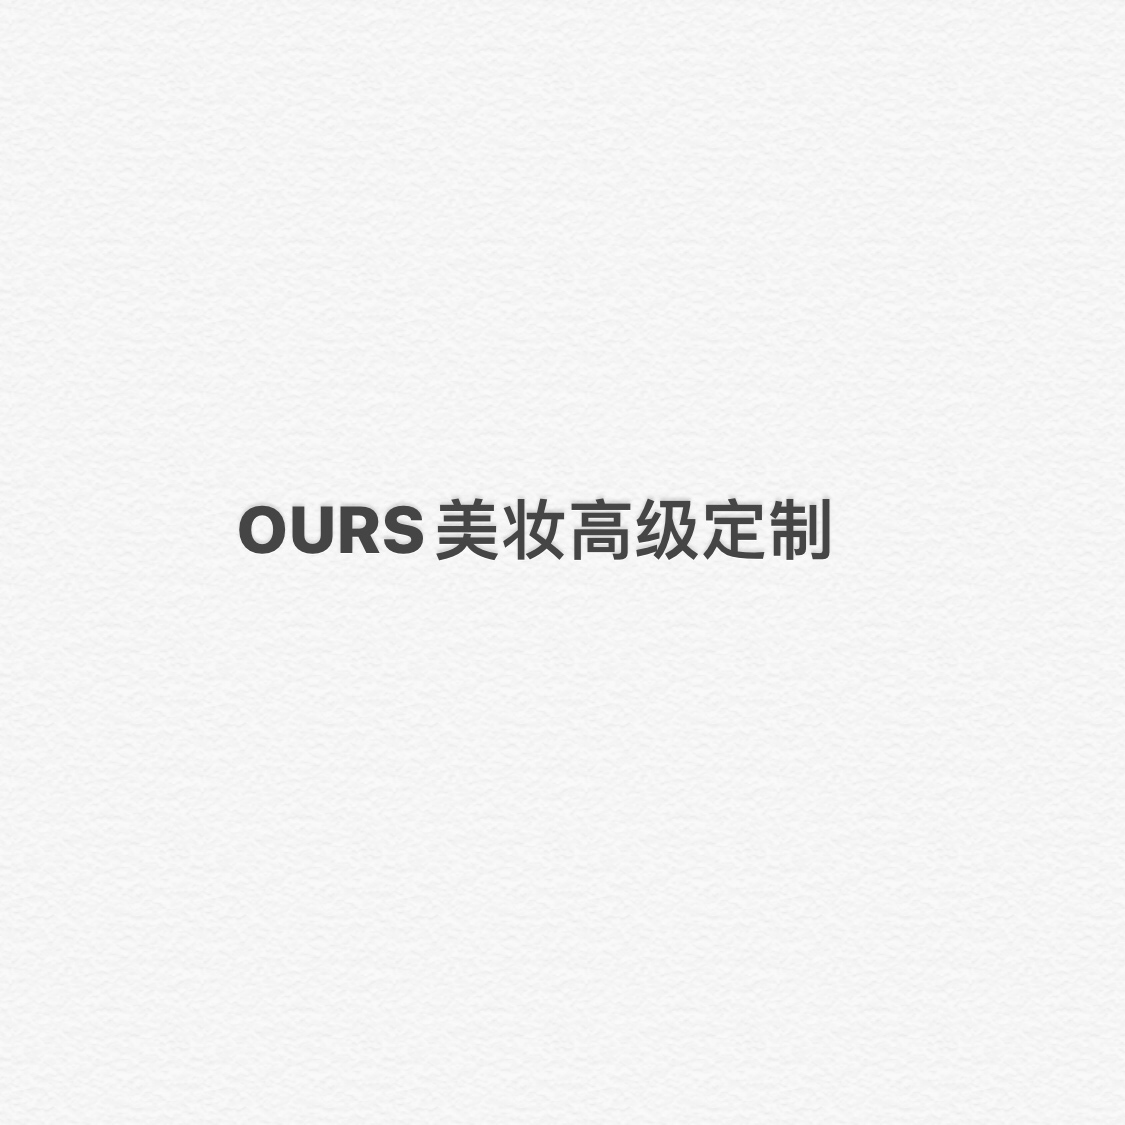 OURS美妆高级定制